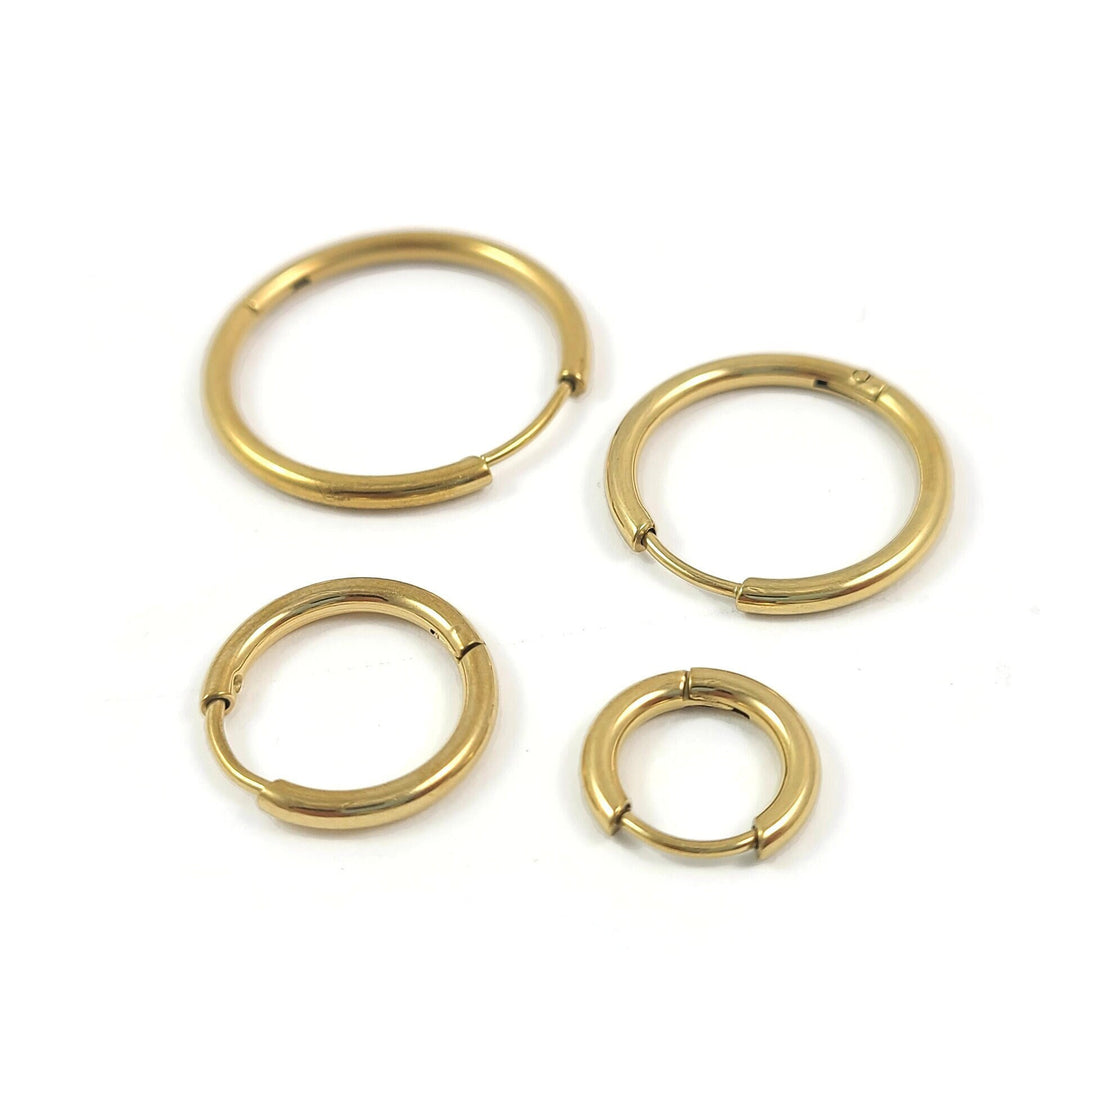 Gold stainless steel earring hoops, Hypoallergenic earring findings, Gold plated huggie hoops, 4 sizes available